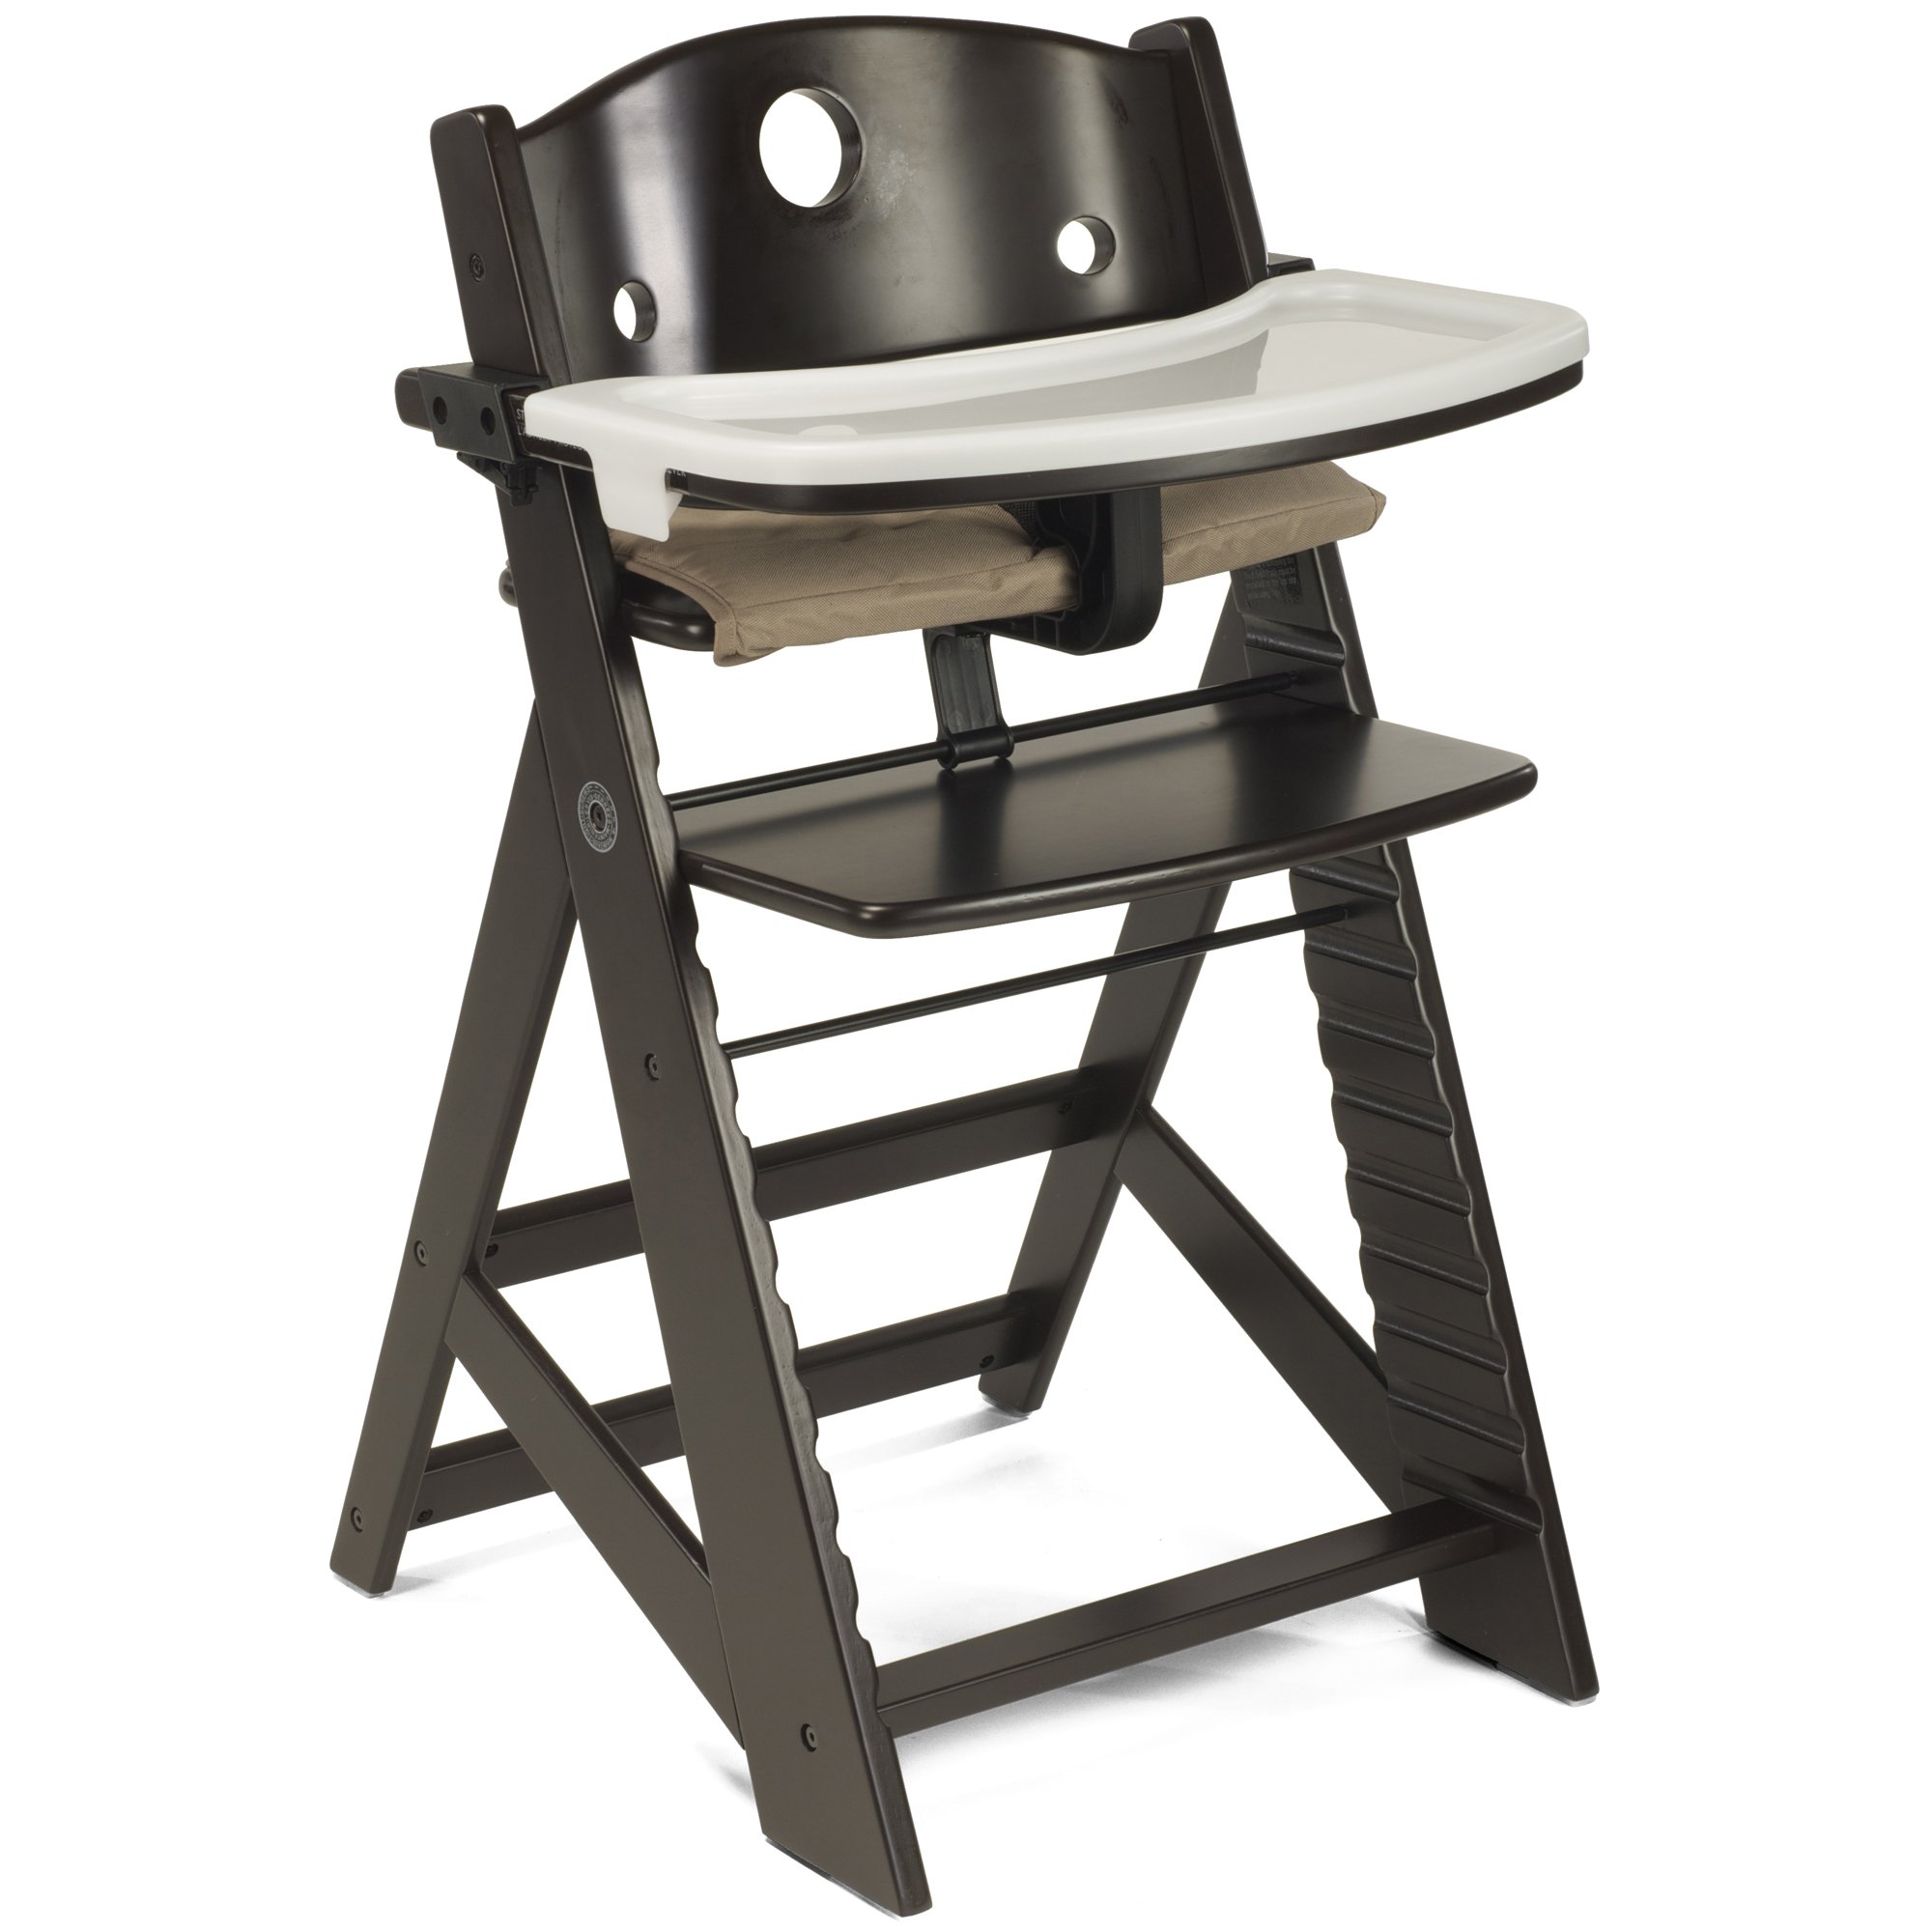 Keekaroo Height Right High Chair with Tray, Espresso